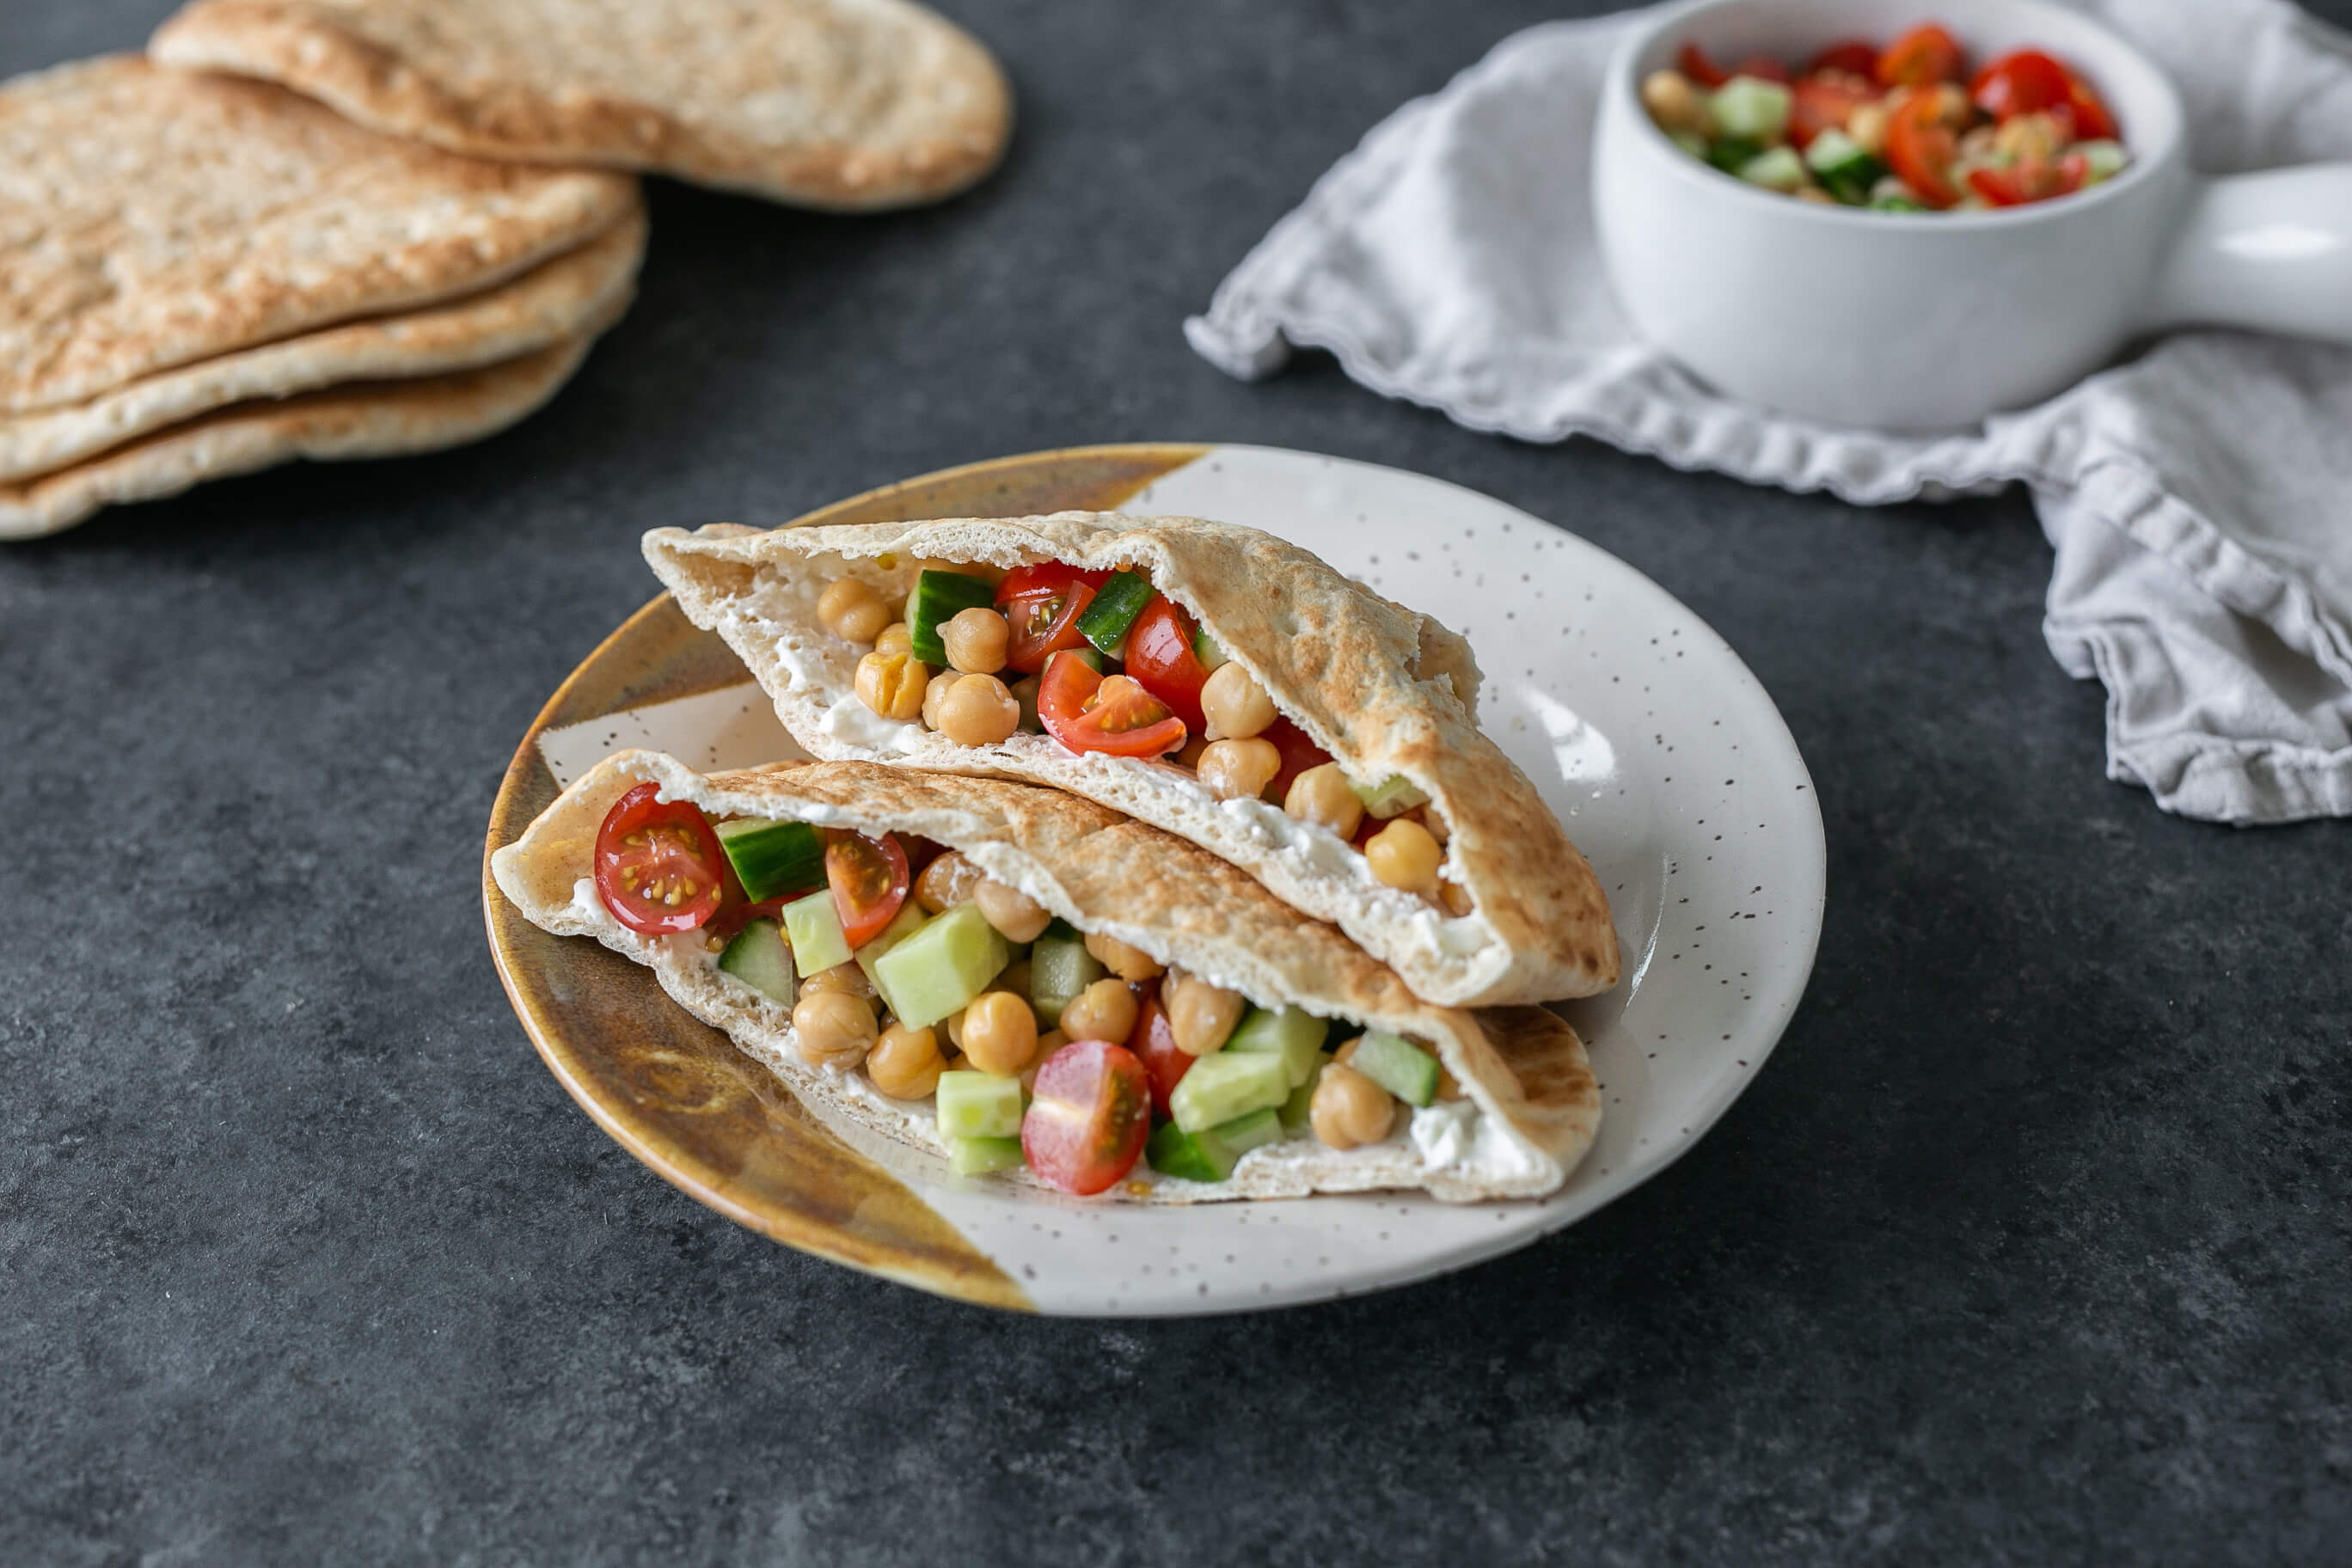 20 Meal Ideas to Support Student-Athletes: Chopped Salad Pitas